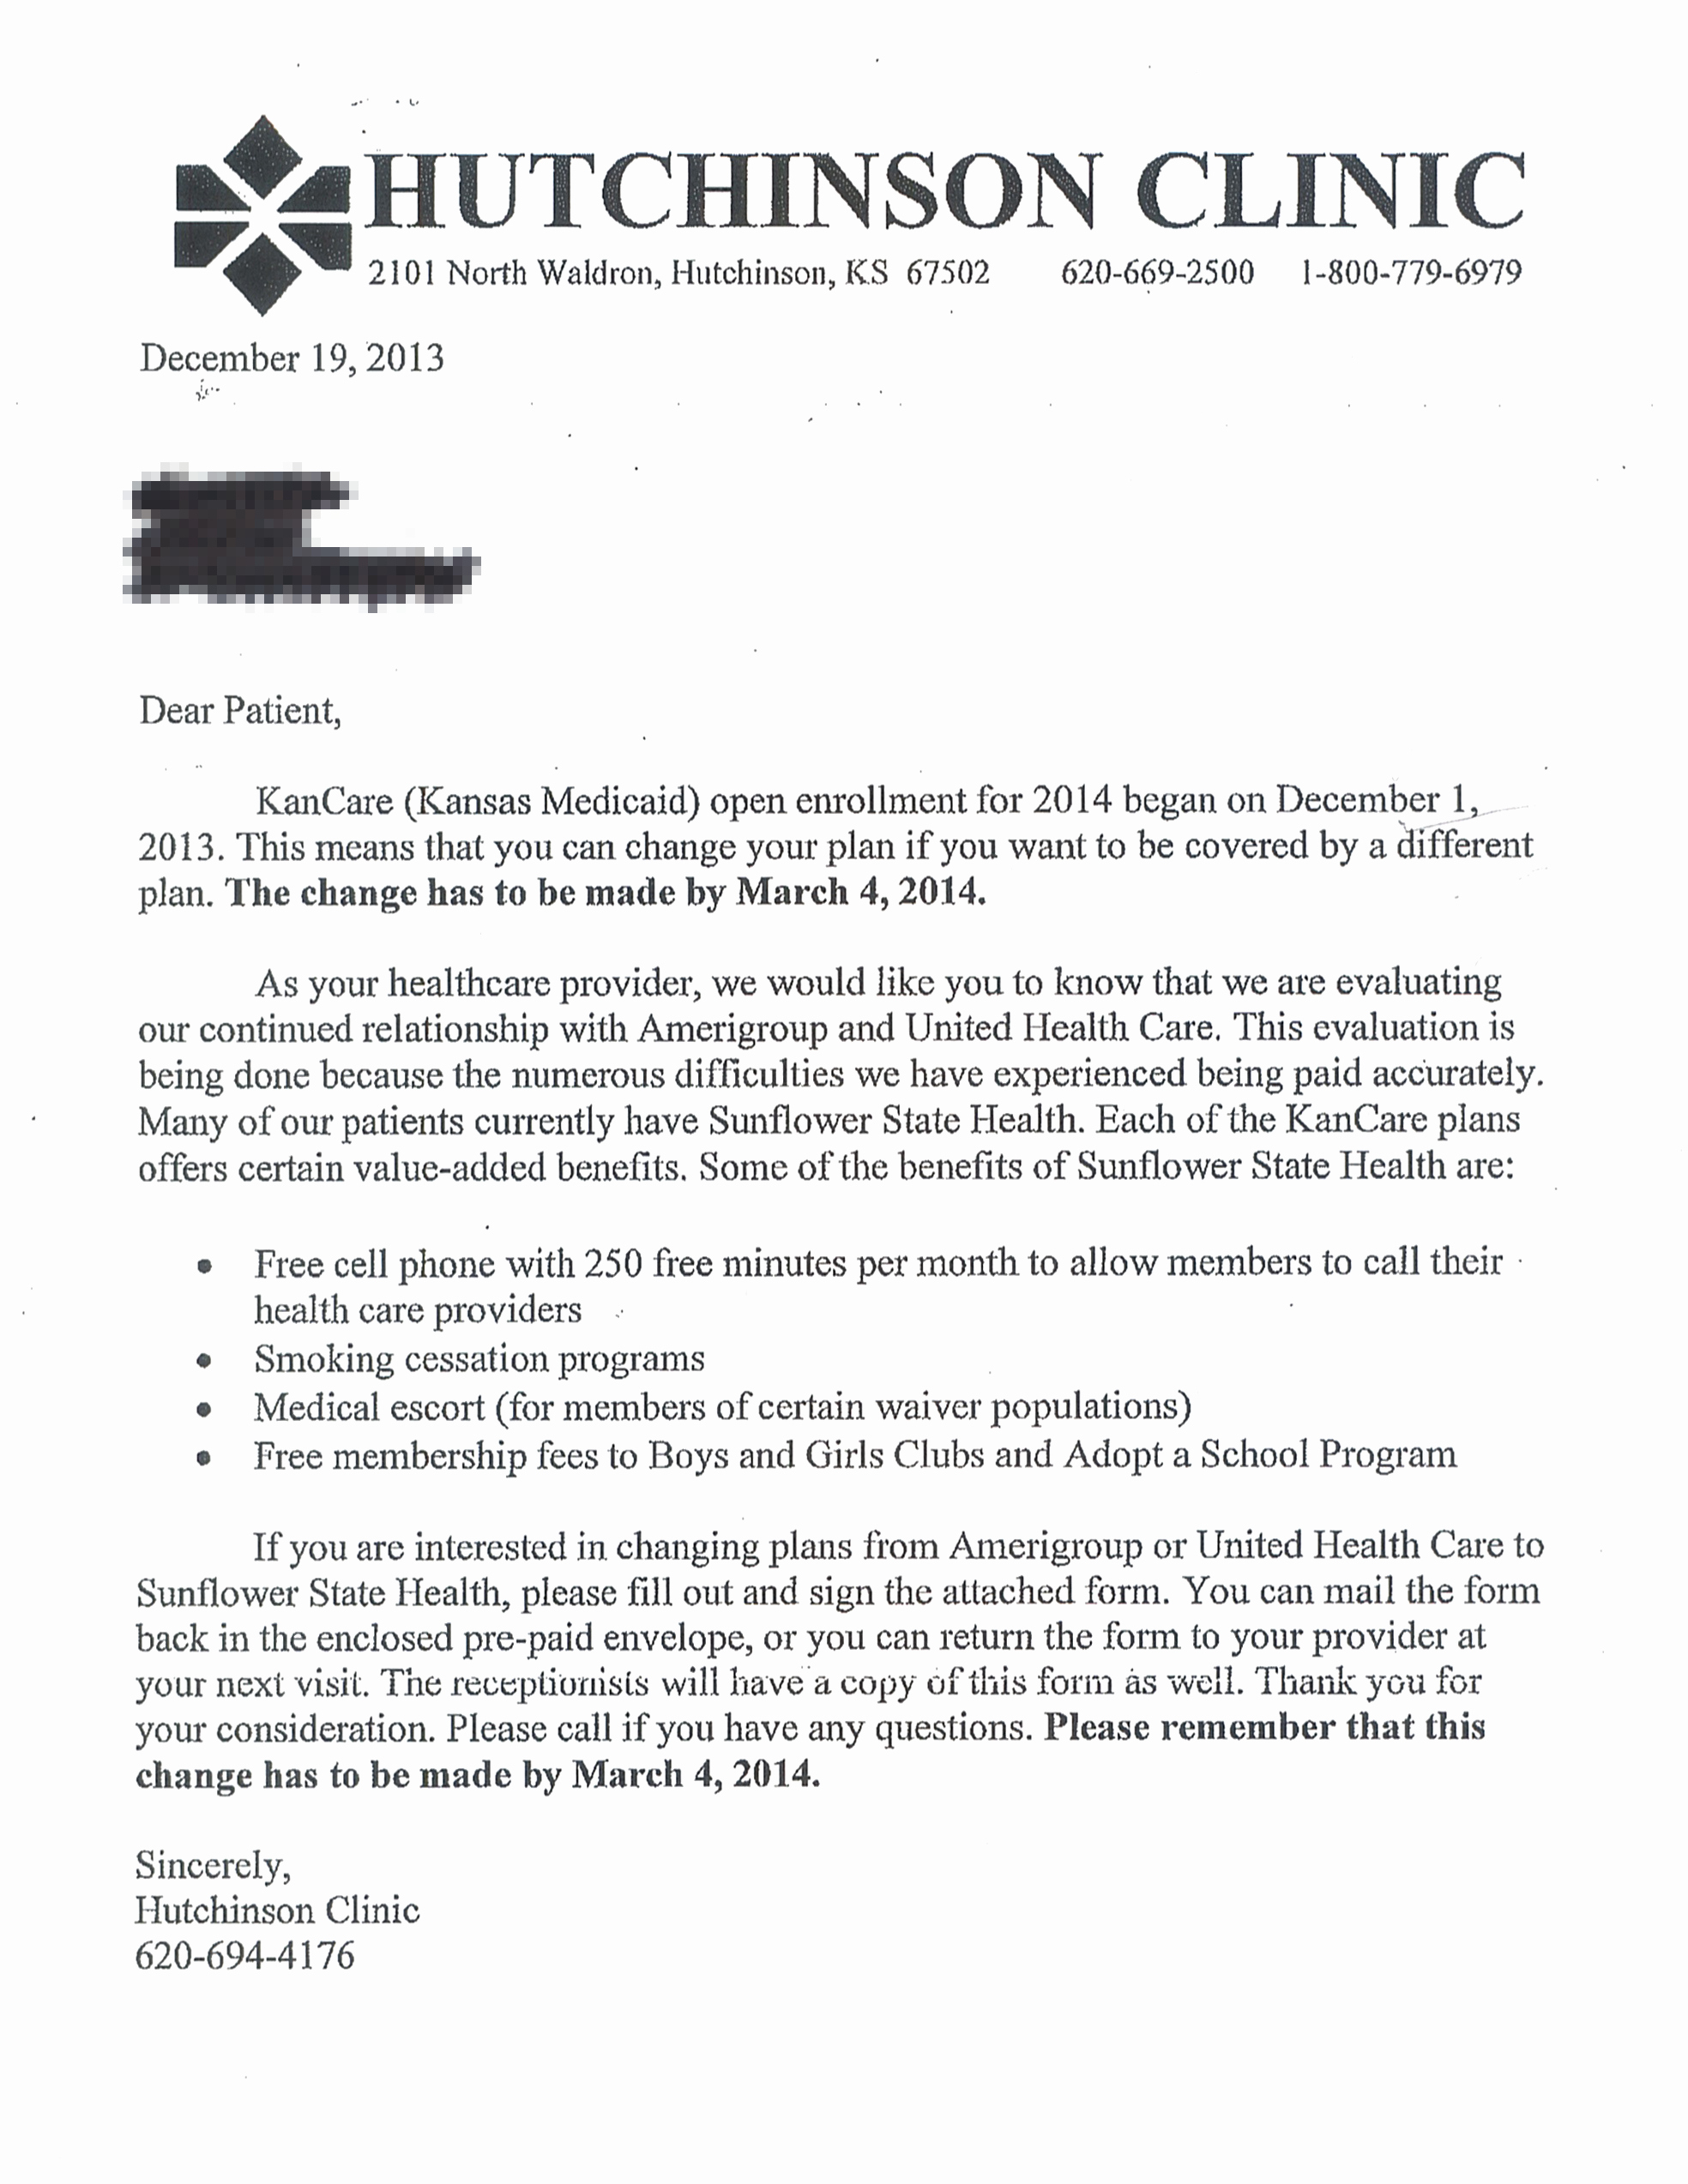 Open Enrollment Letters to Employees Lovely Hutchinson Clinic’s Letter Throws A Curve to Kancare Open